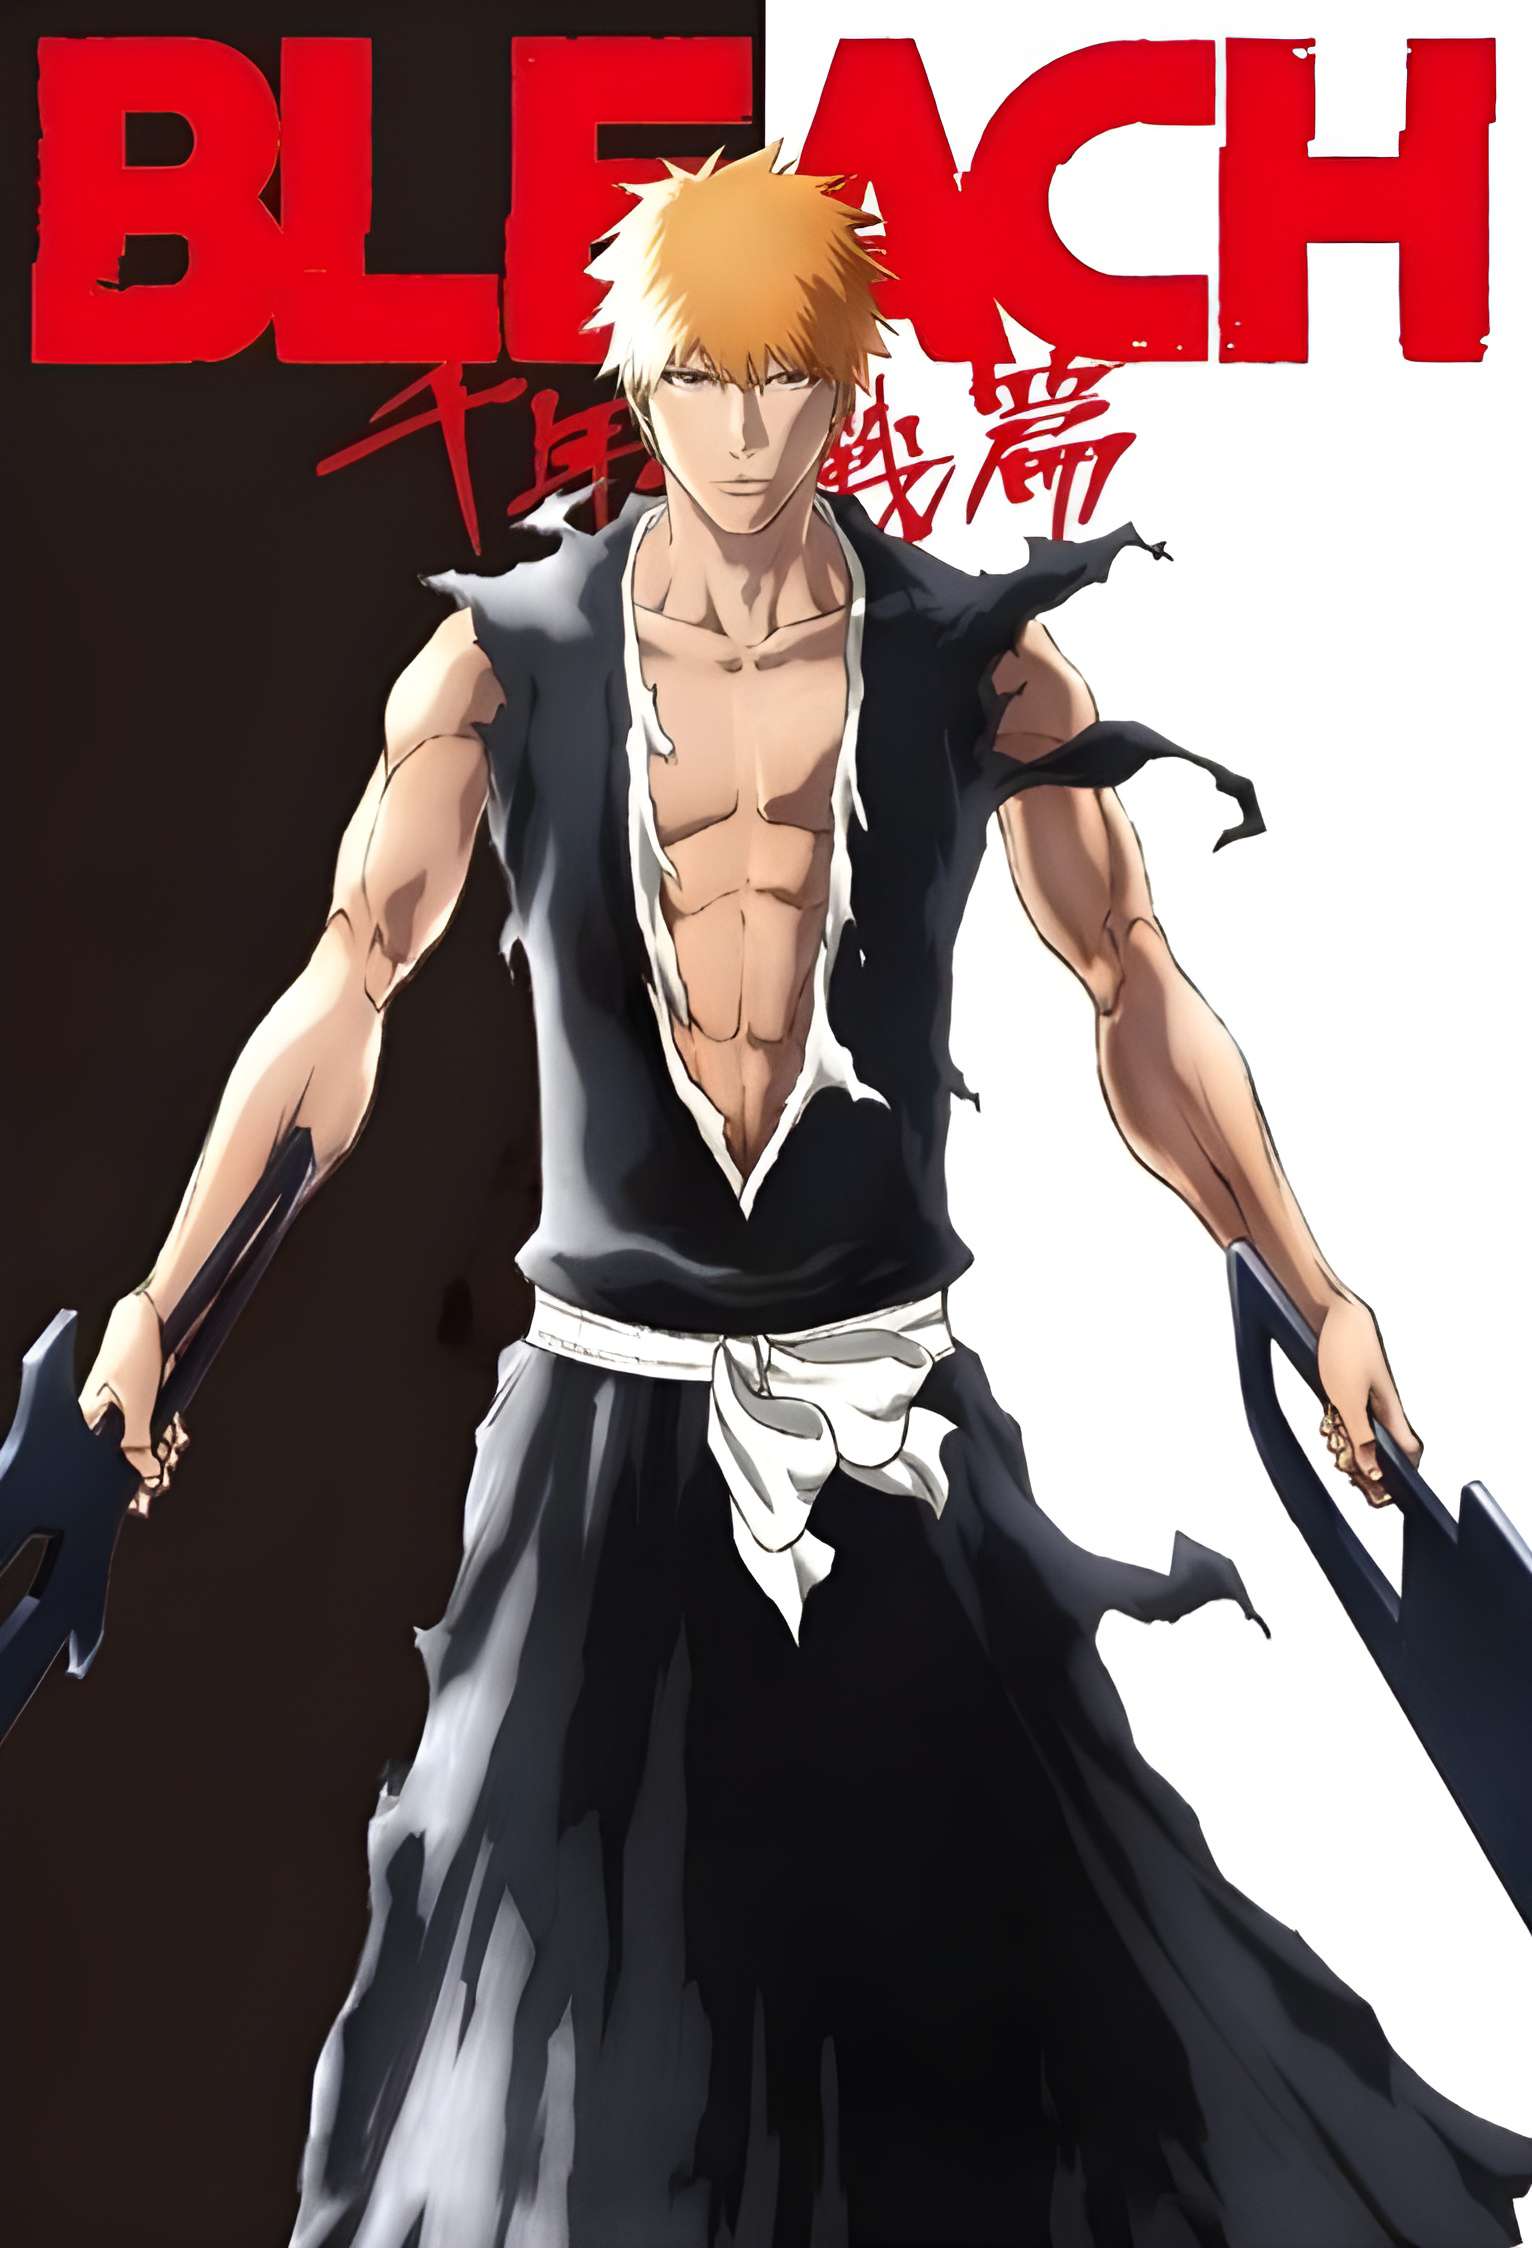 BLEACH 2023 IS ANIME OF THE YEAR?!